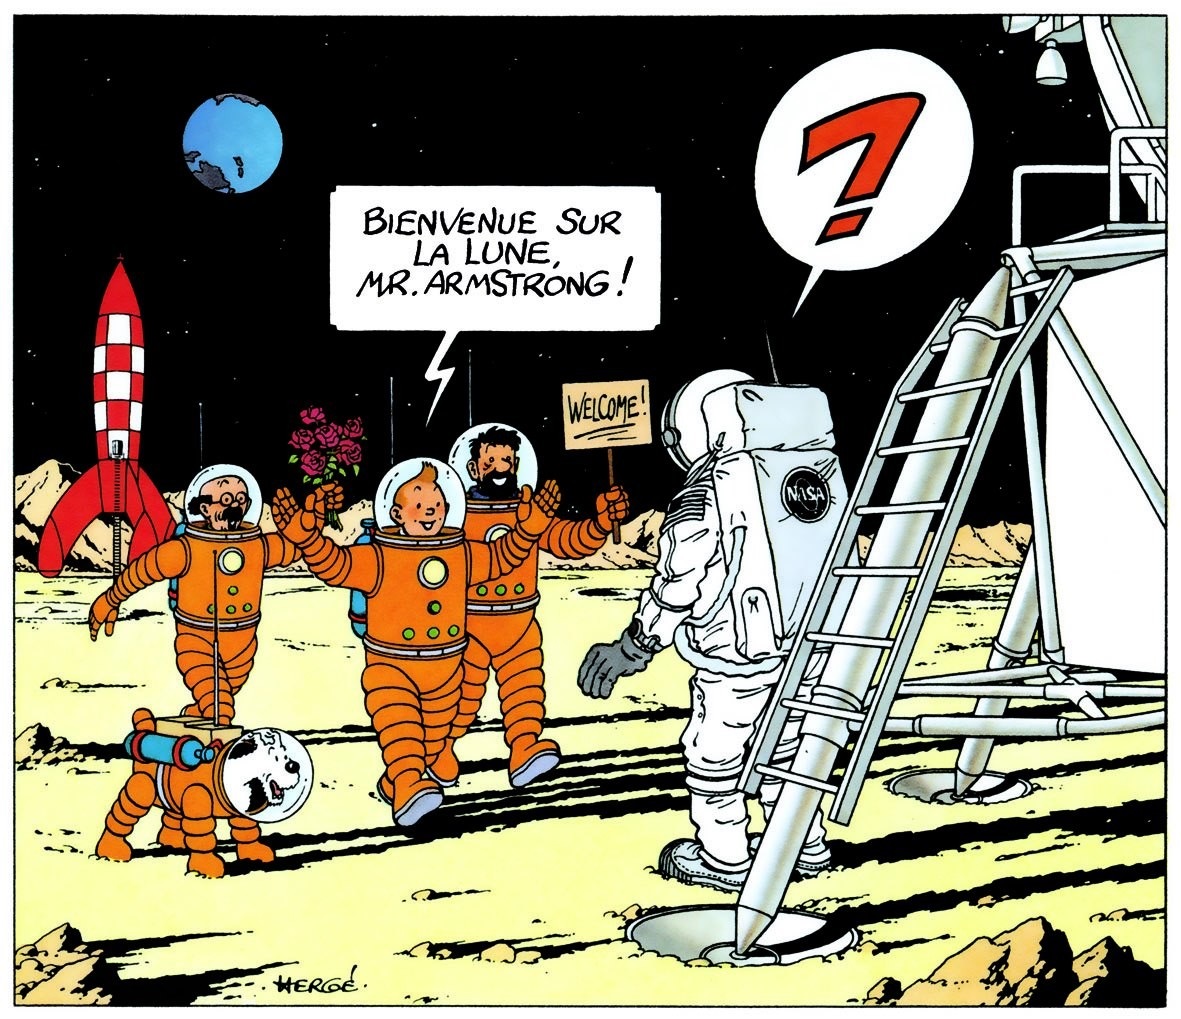 How Belgians have raced into space